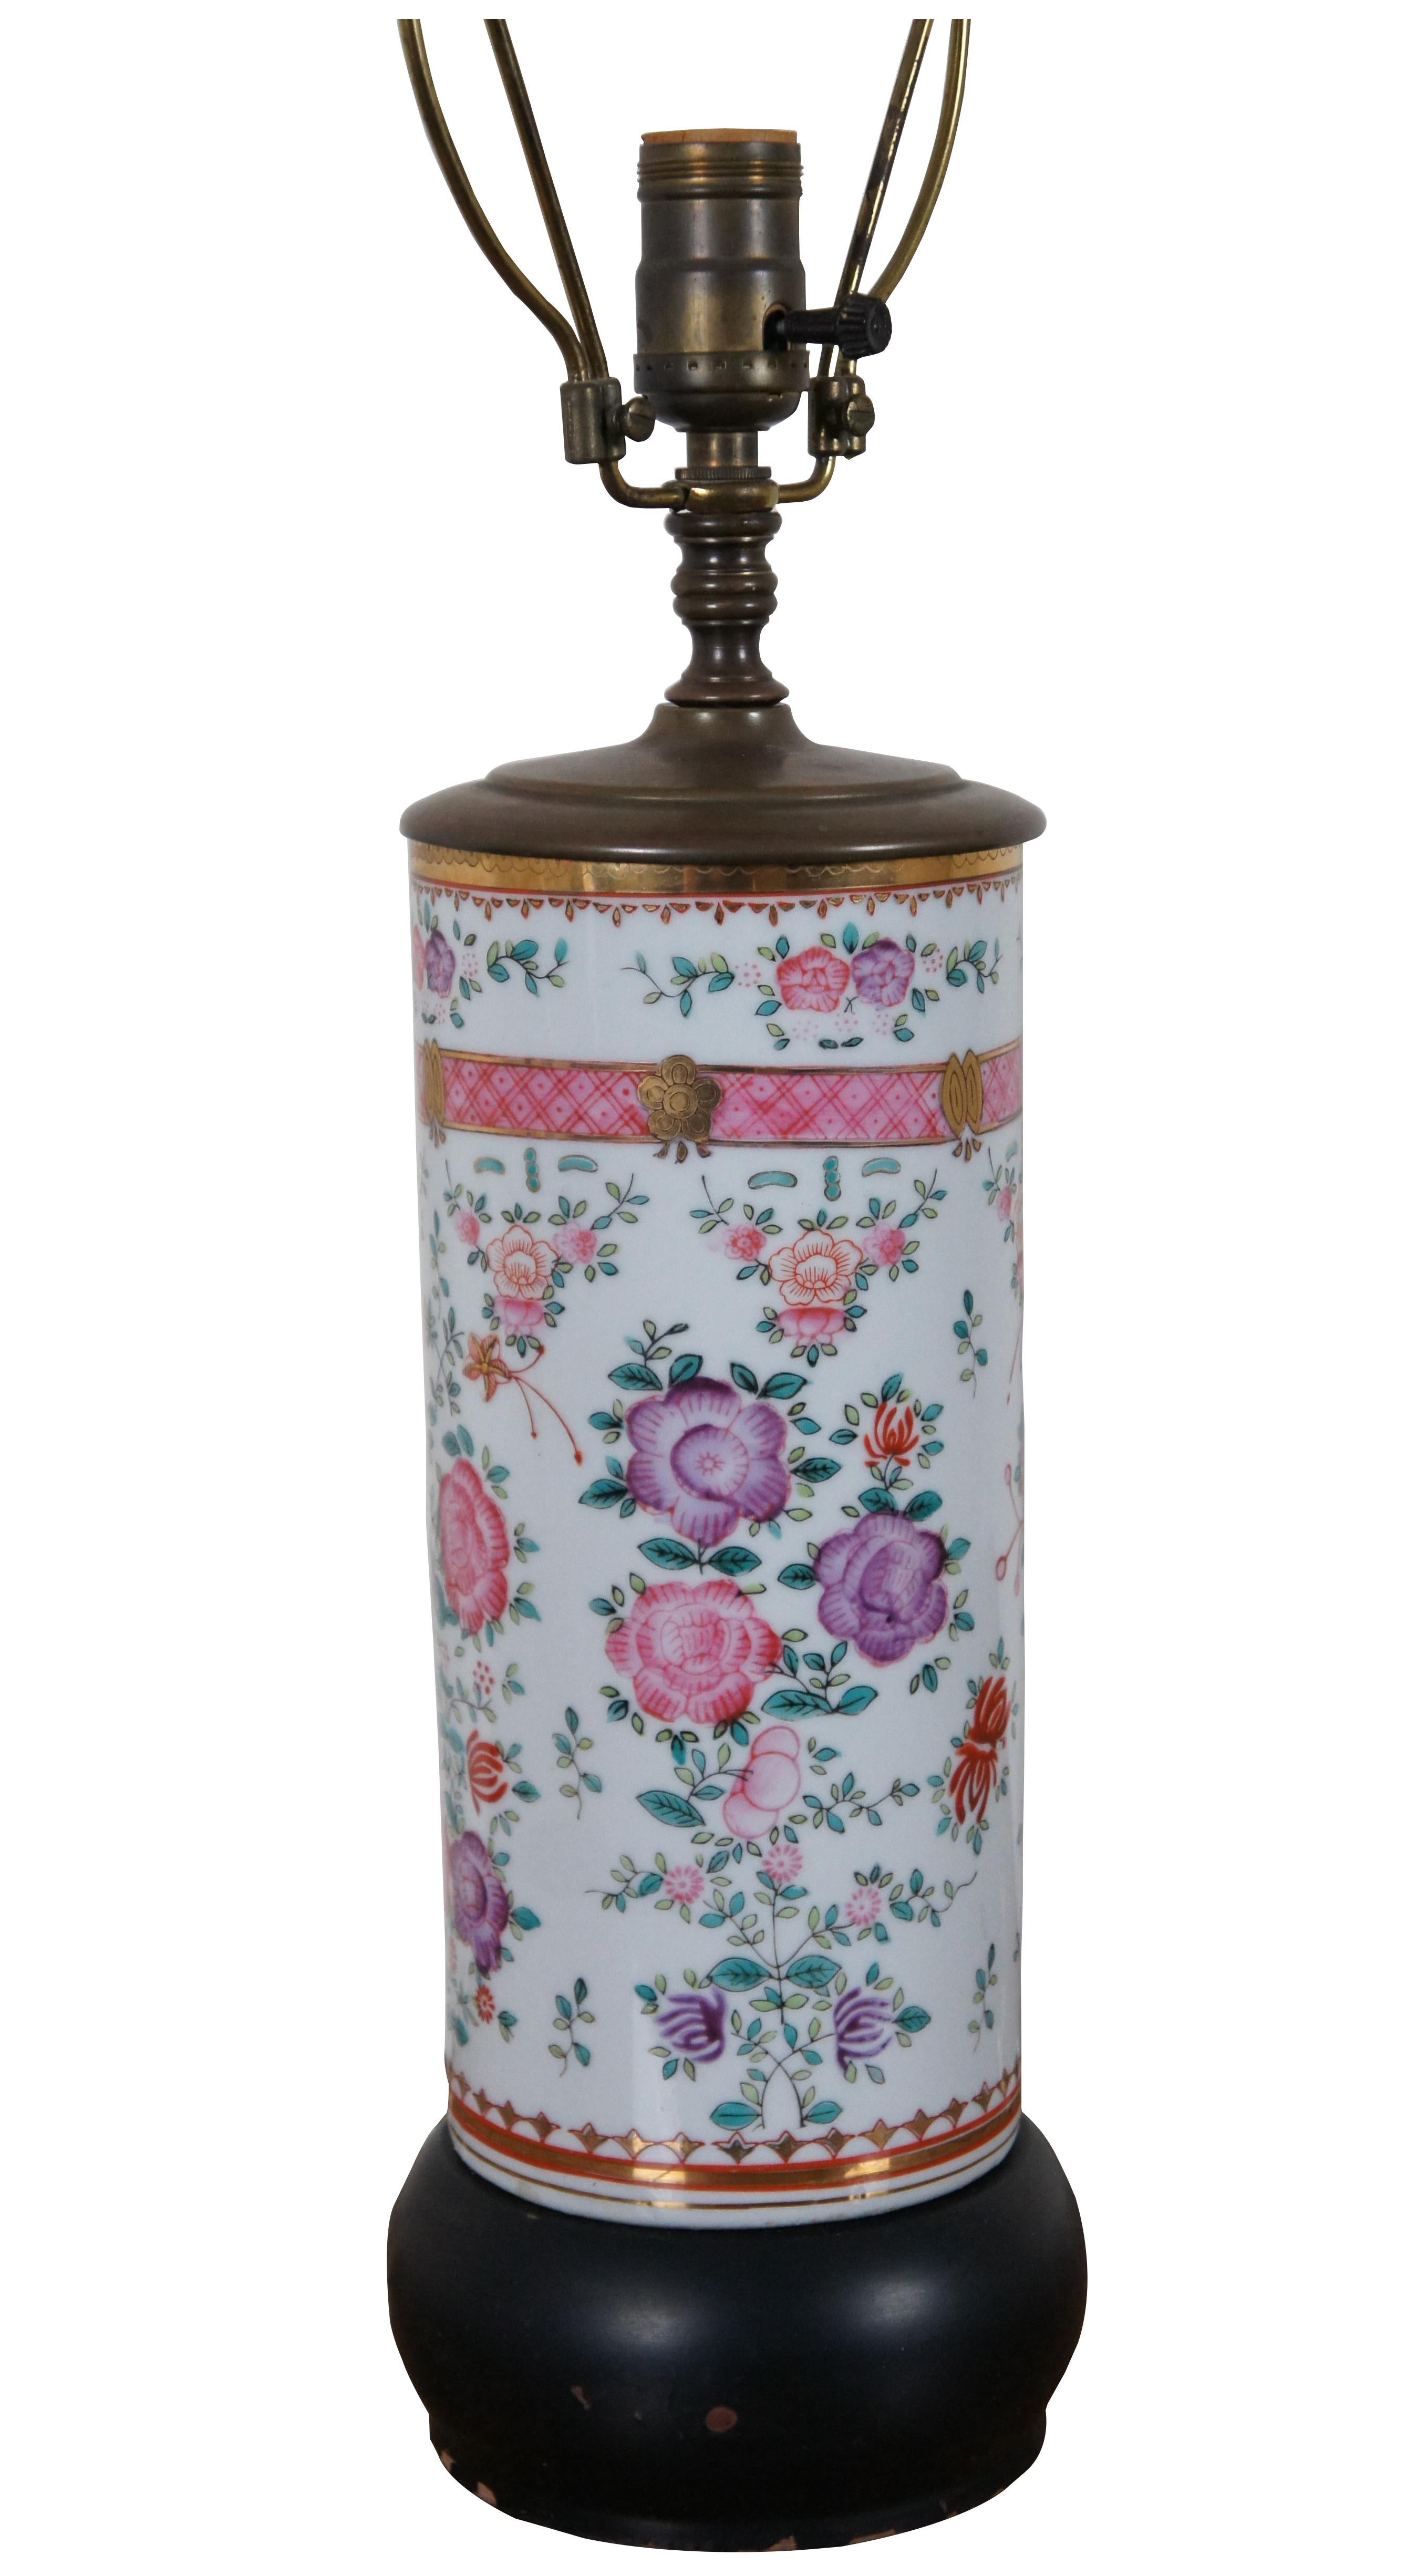 Antique Chinese famille rose porcelain cylindrical vase lamp with wood base and topper, decorated with a design of flowers in pink and purple.

5.5” x 18.75” / Total Height – 28.5”  (Diameter x Height)